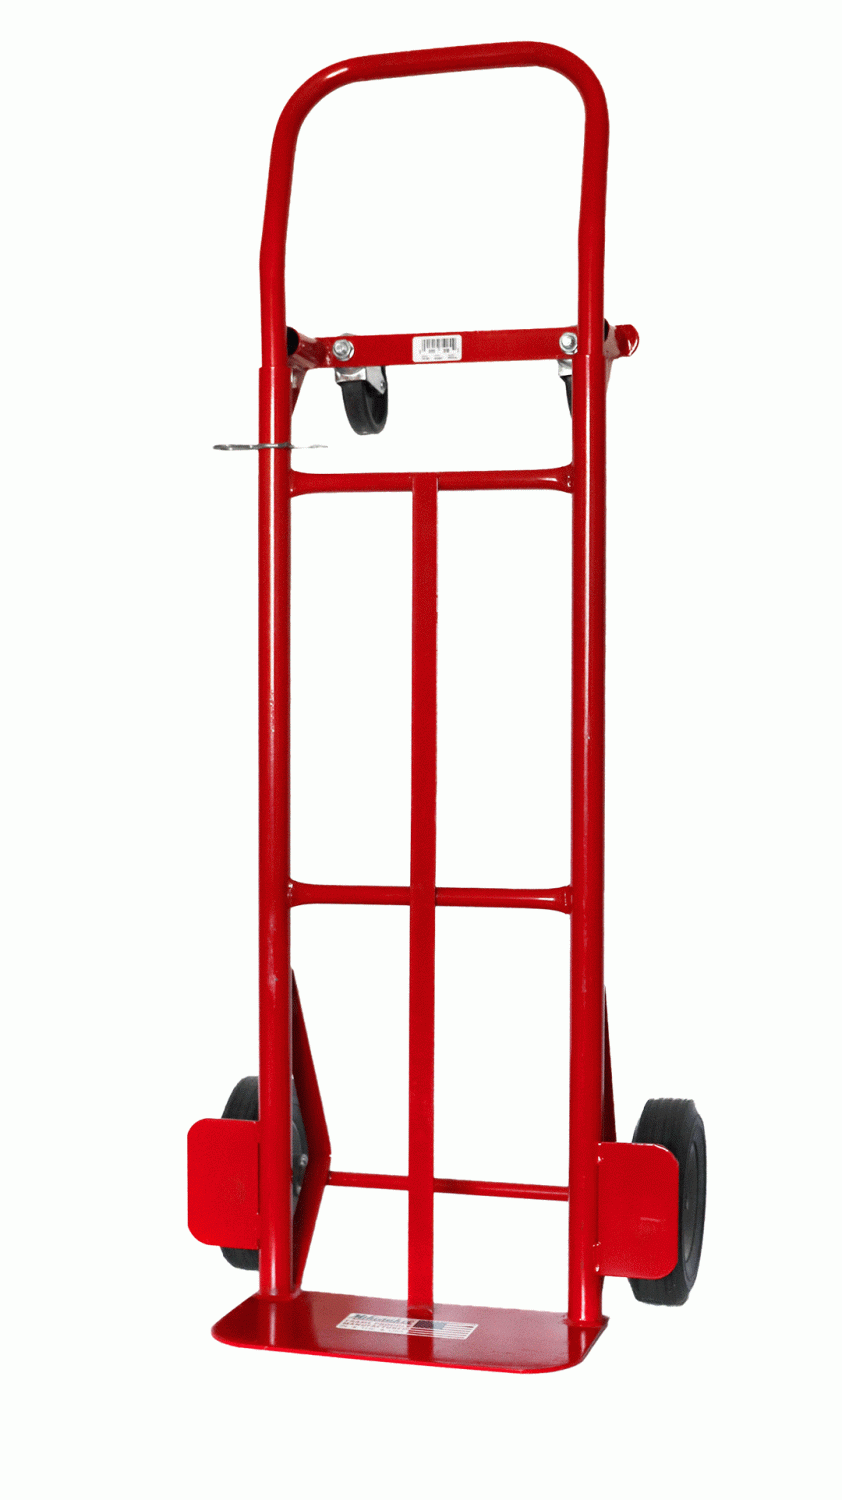 600lb for sale online Milwaukee 35180 2-in-1 Convertible Hand Truck